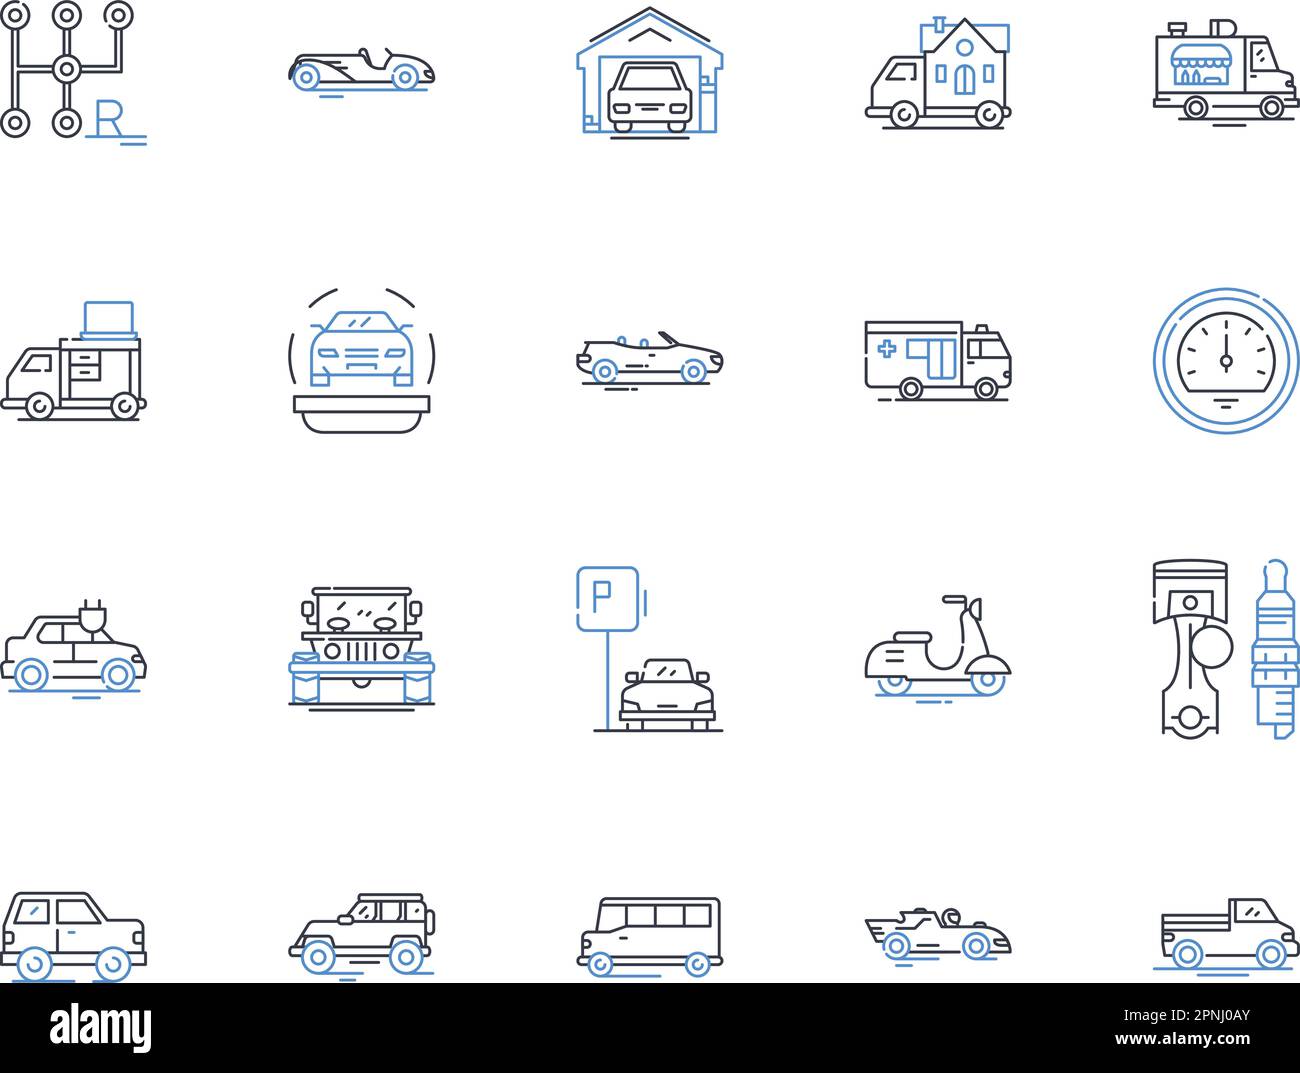 Boat and watercraft line icons collection. Sailboat, Yacht, Canoe, Kayak, Paddleboard, Raft, Jet Ski vector and linear illustration. Catamaran,Dinghy Stock Vector